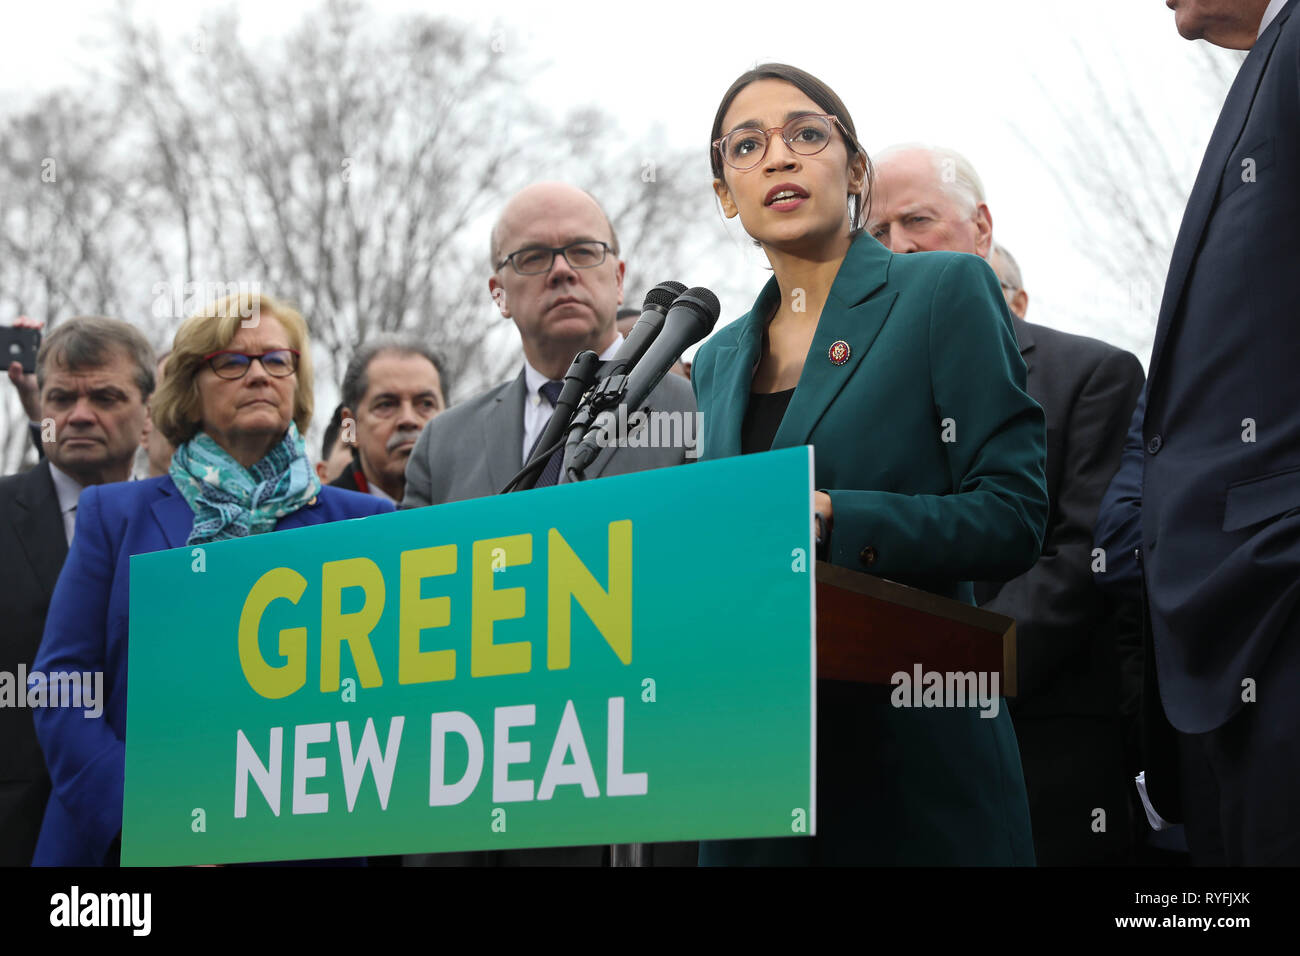 U.S. Rep. Alexandria Ocasio-Cortez of New York, along with other members of Congress announce the Green New Deal legislation during a press conference outside the Capitol Building February 7, 2019 in Washington, D.C. Stock Photo